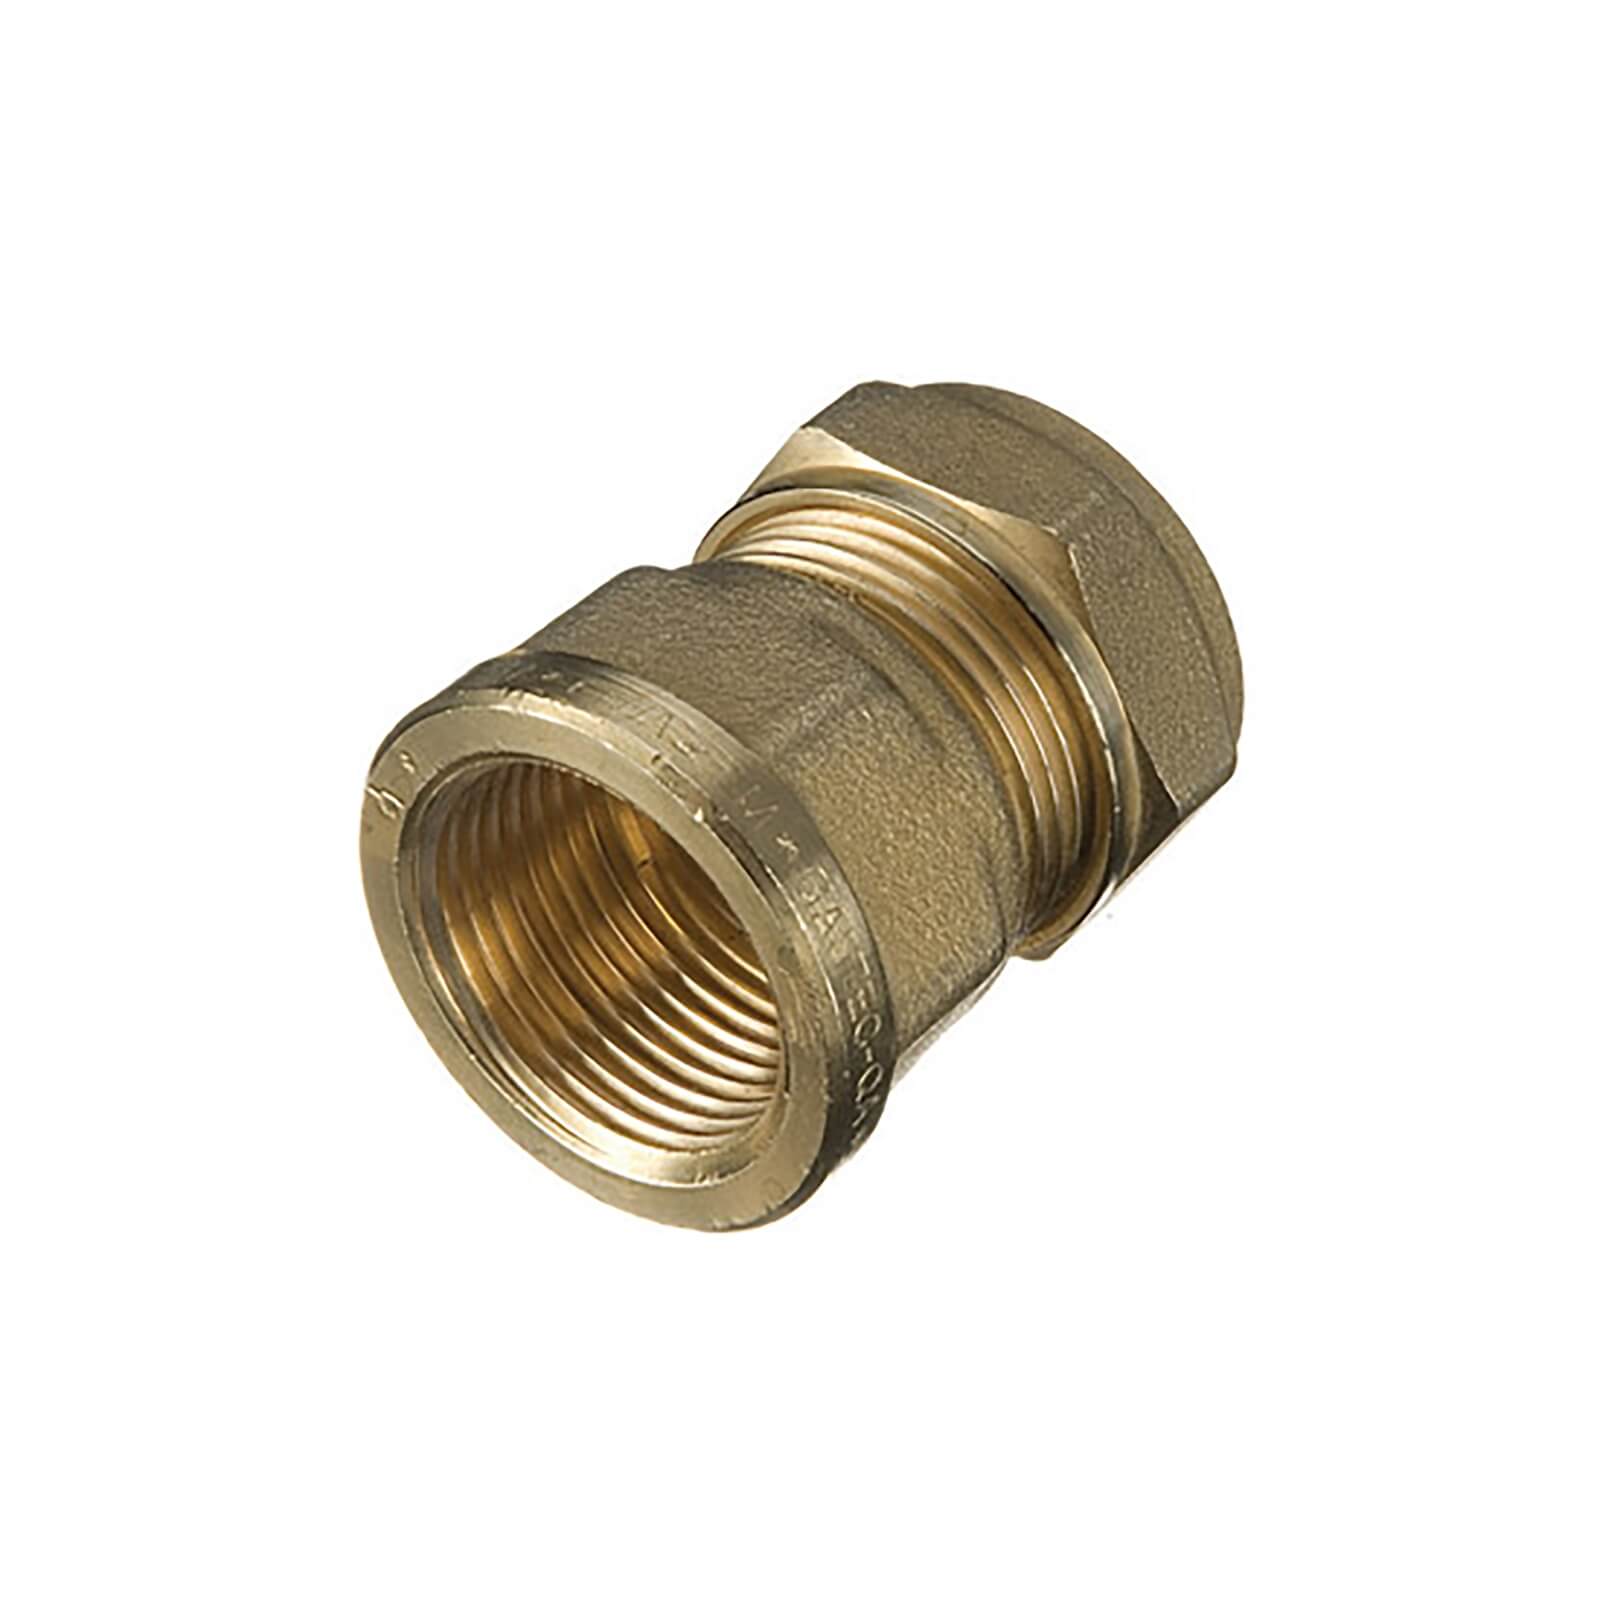 Compression Female Coupler 22mm x 0.5in